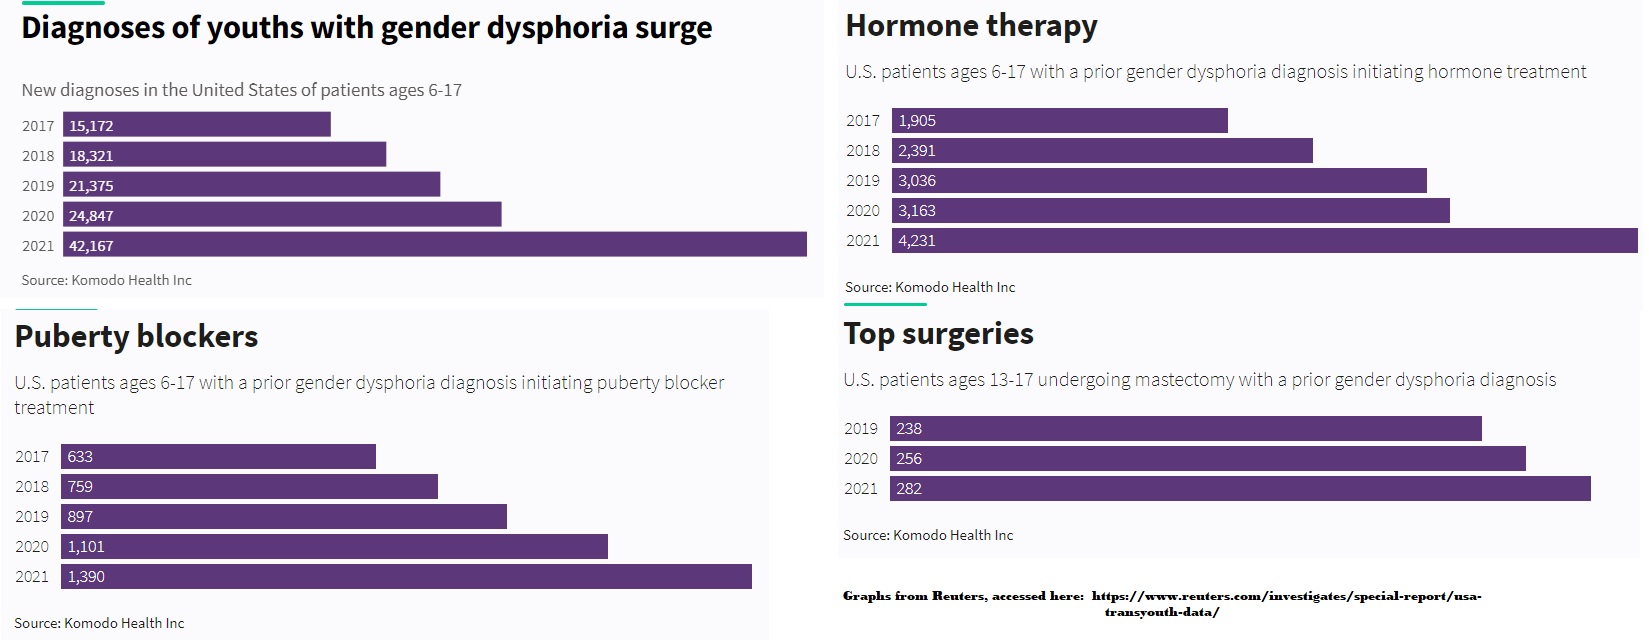 Adolescent youth: puberty blockers, hormone therapy, and top surgery GAC care (Graphs Per Reuters) 